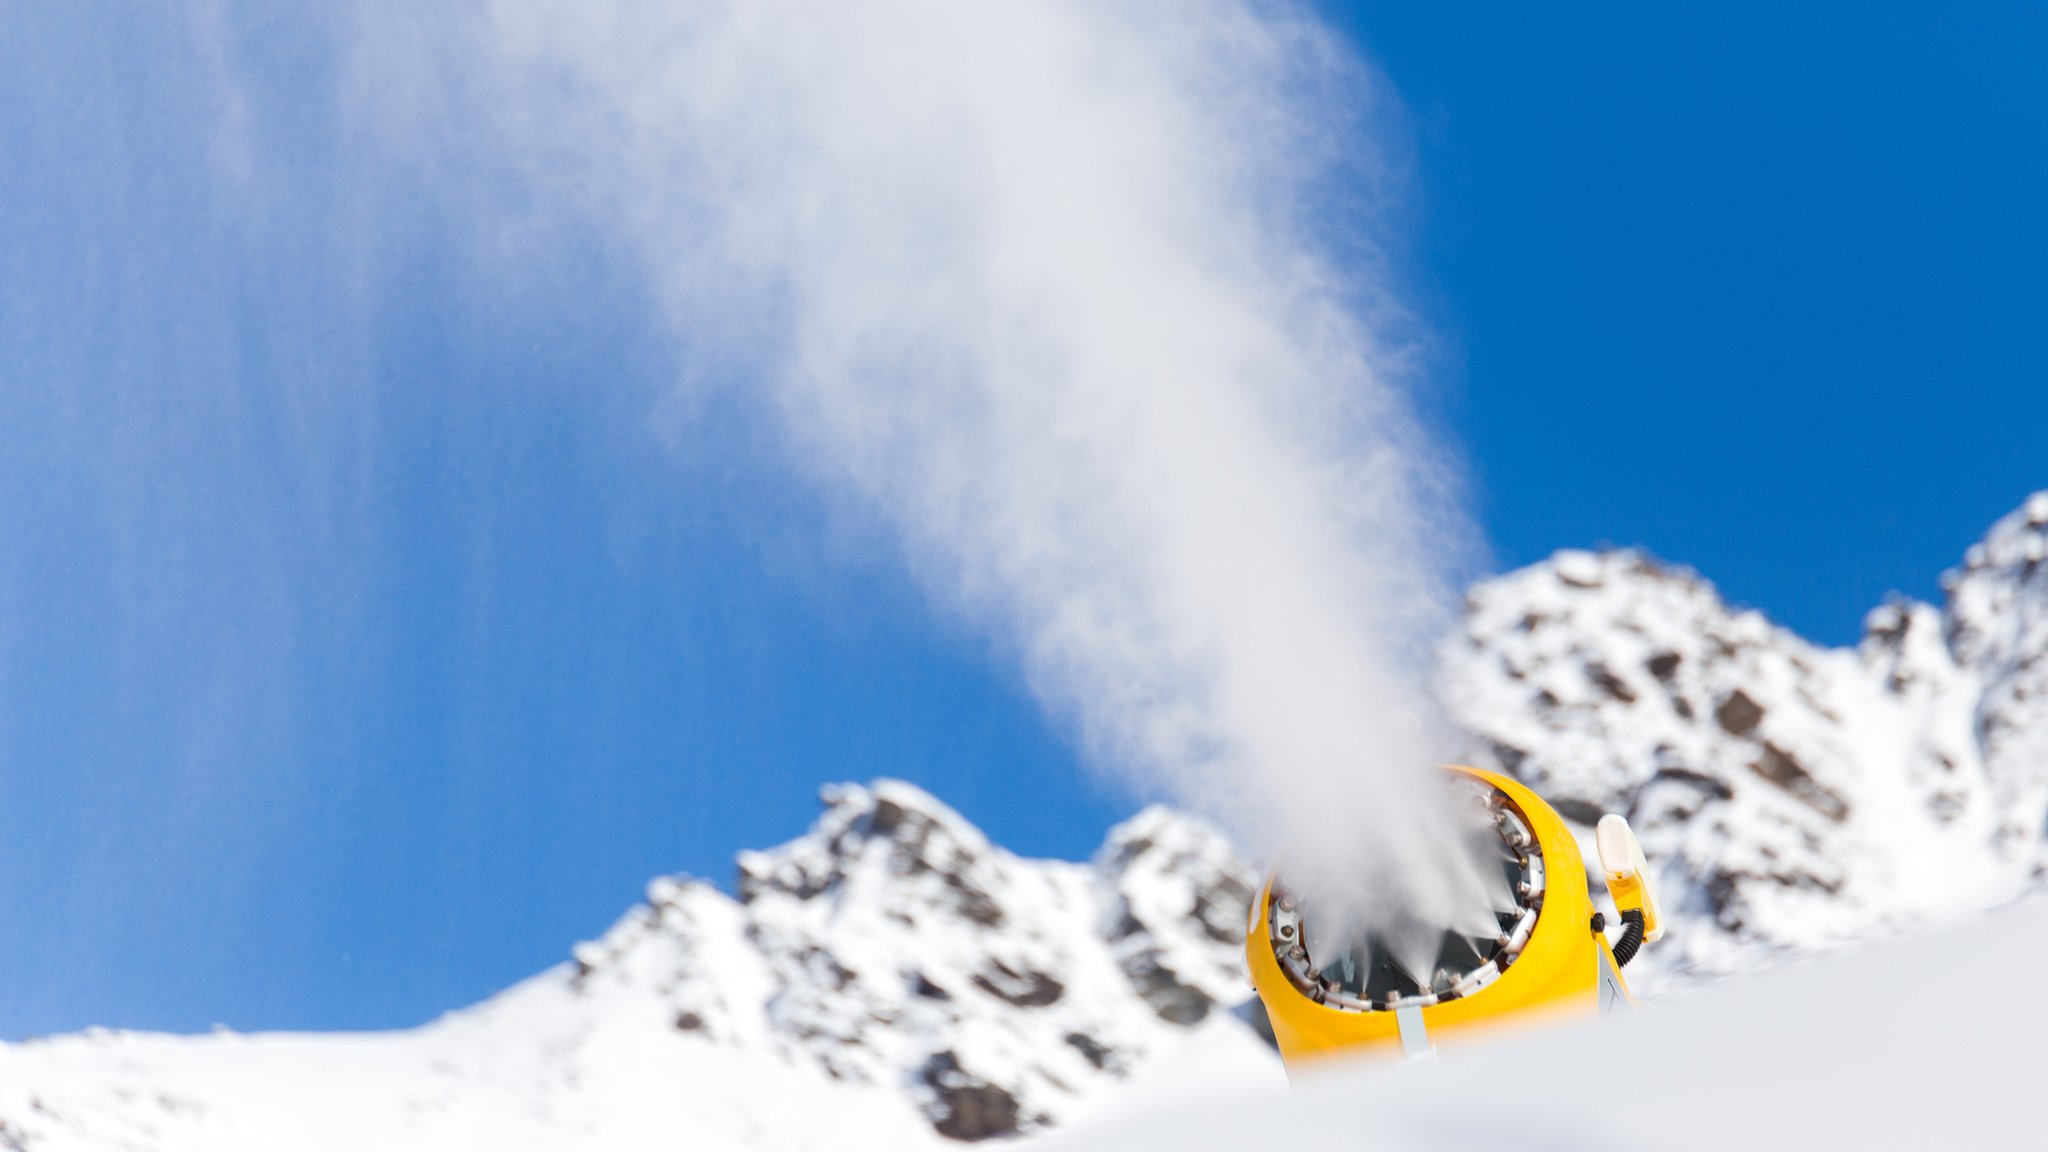 Is artificial snowmaking detrimental to the environment? 